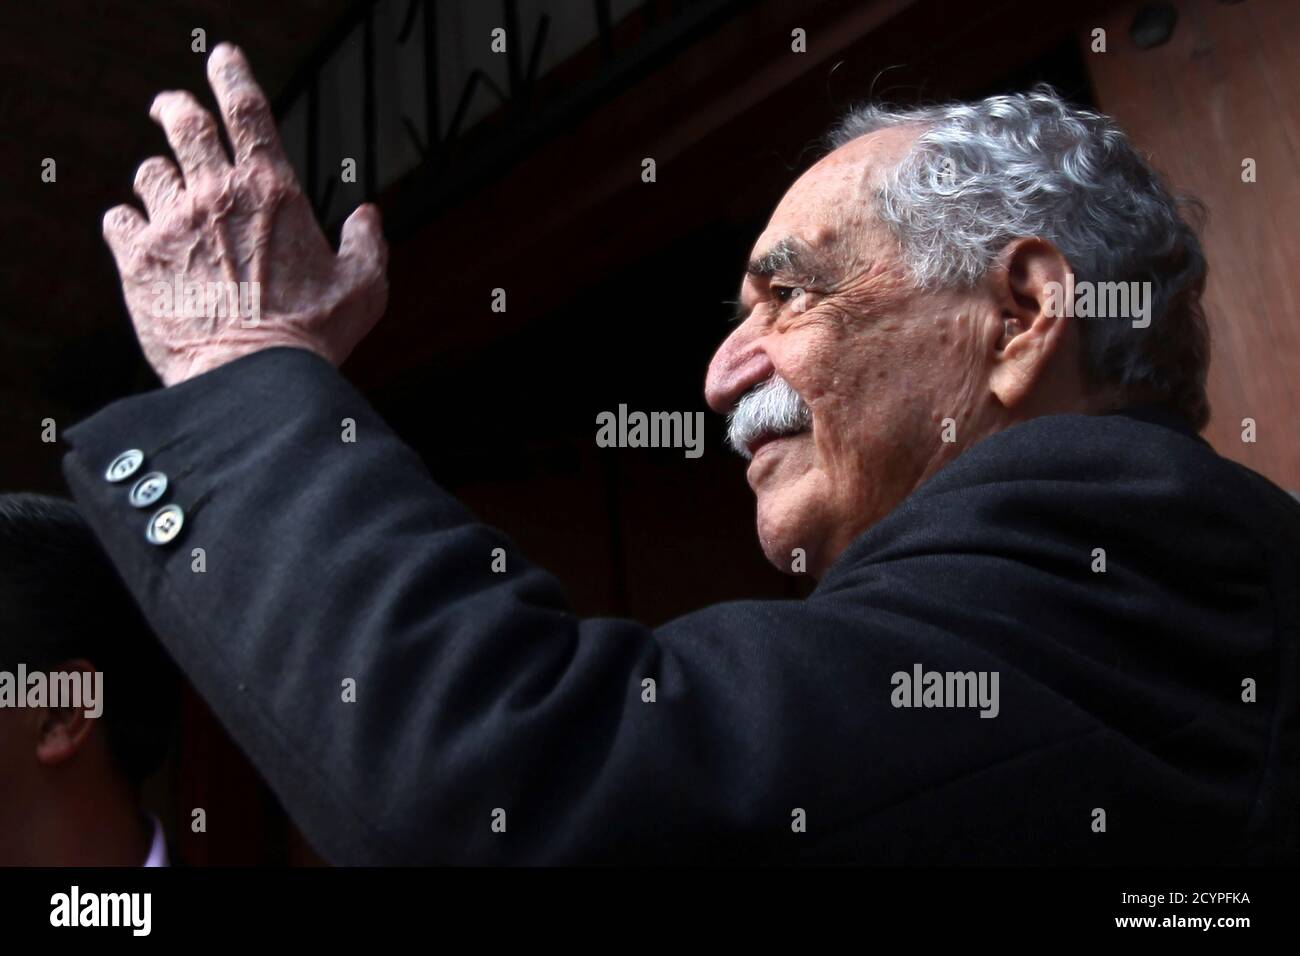 Gabriel Garcia Marquez greets journalists and neighbours on his birthday outside his house in Mexico City March 6, 2014. Garcia Marquez, the octogenarian titan of Latin American literature, celebrated his 87th birthday in Mexico City on Thursday at his home in the company of family and friends. REUTERS/Edgard Garrido (MEXICO - Tags: SOCIETY) Stock Photo